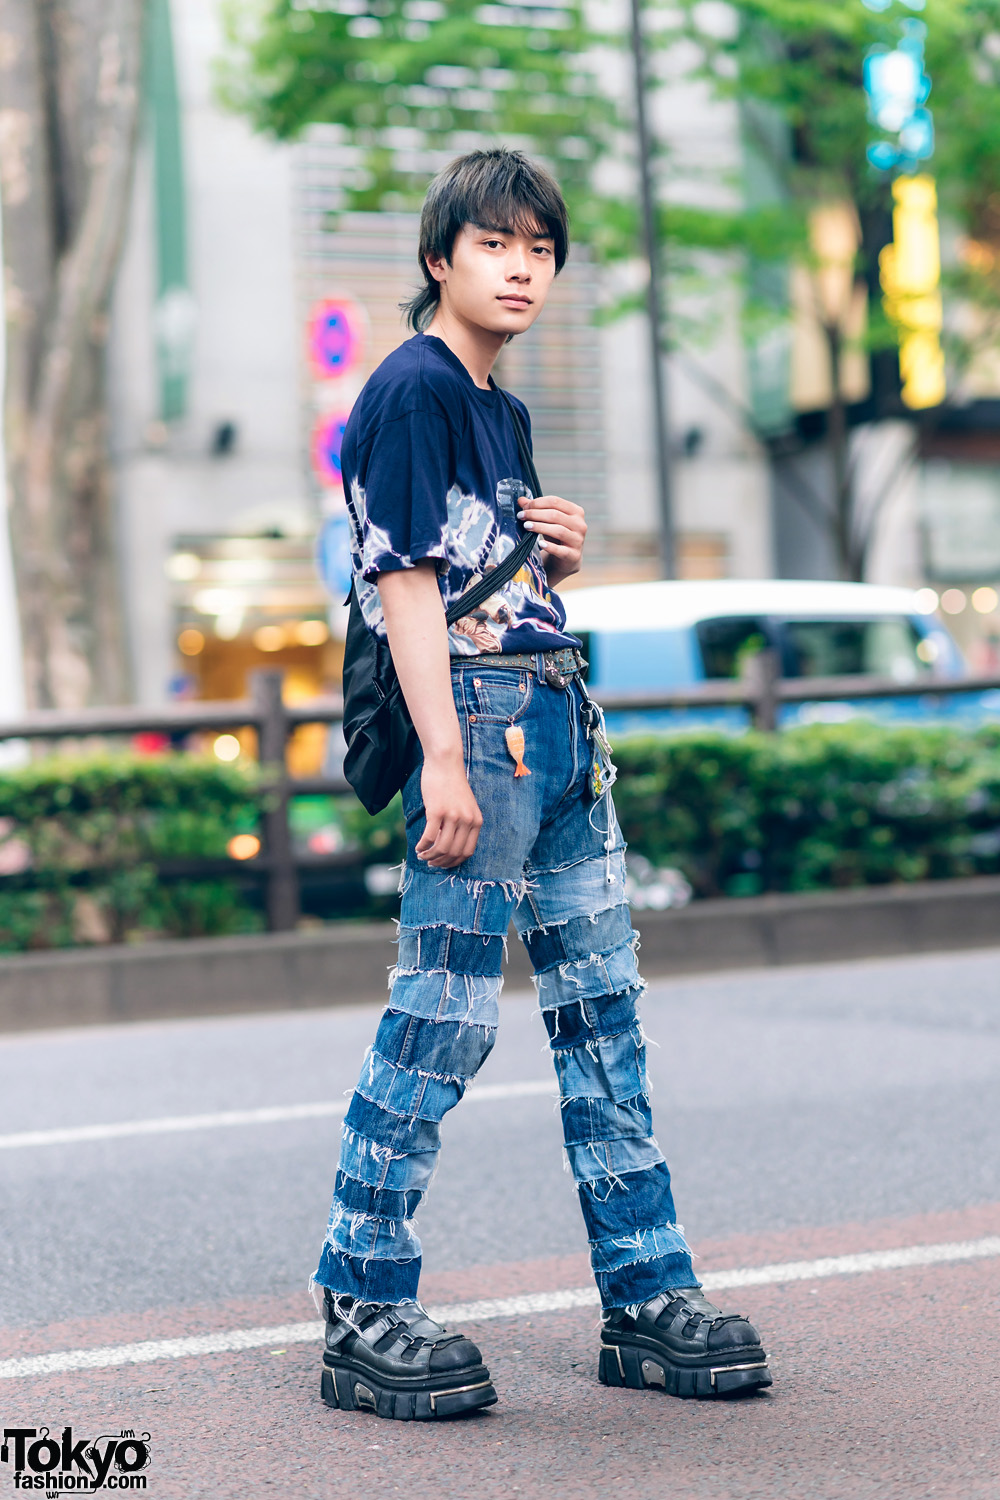 Men's Street Style in Harajuku w/ Chicago Graphic Print Shirt, Remake Levi's Fringed Patchwork Jeans, Nike Backpack & New Rock Strap Shoes